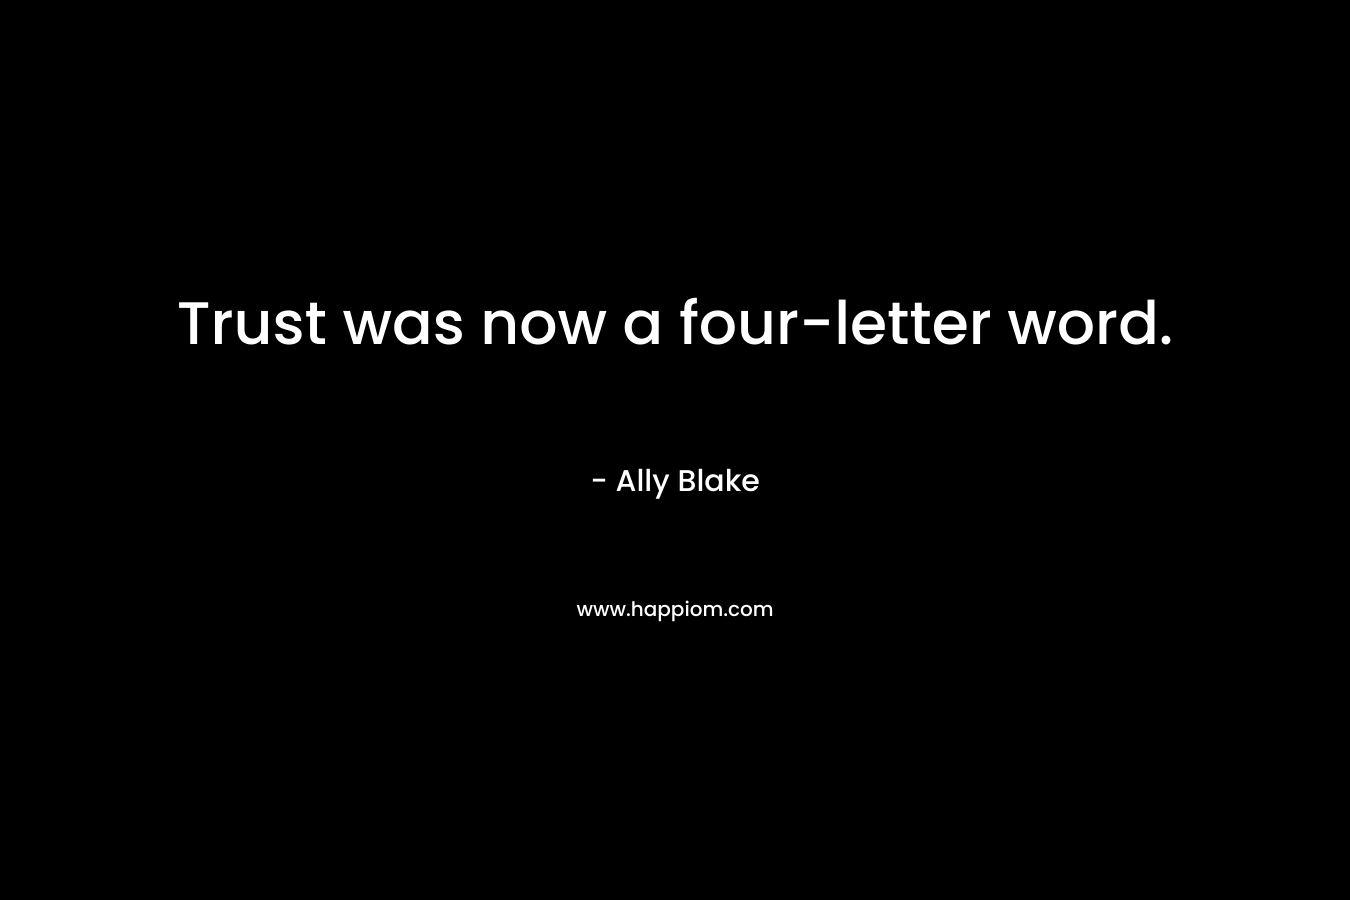 Trust was now a four-letter word. – Ally Blake